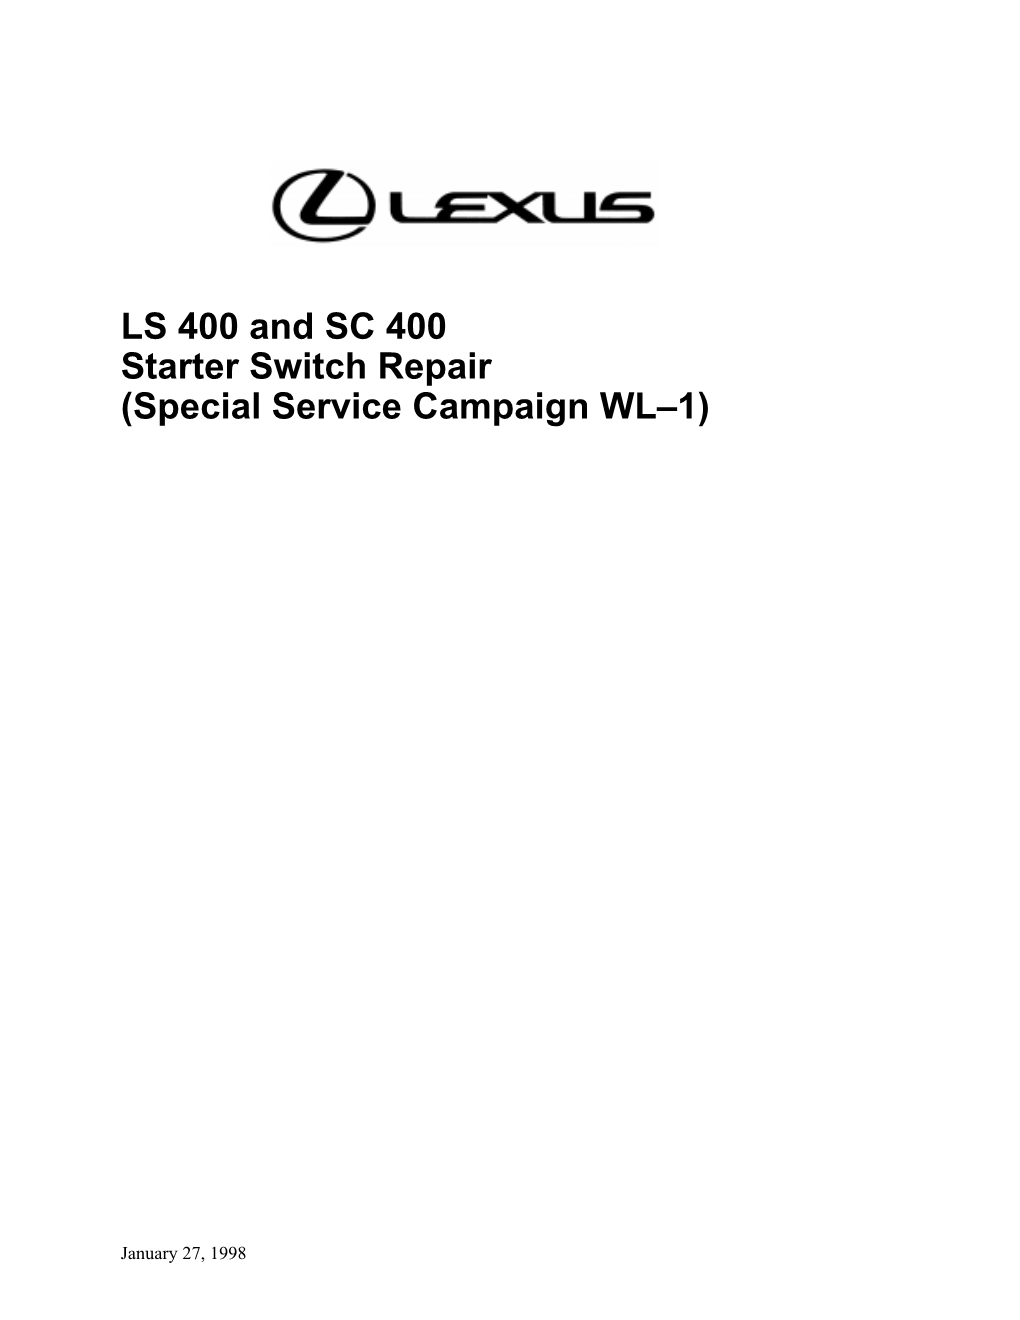 LS 400 and SC 400 Starter Switch Repair (Special Service Campaign WL–1)